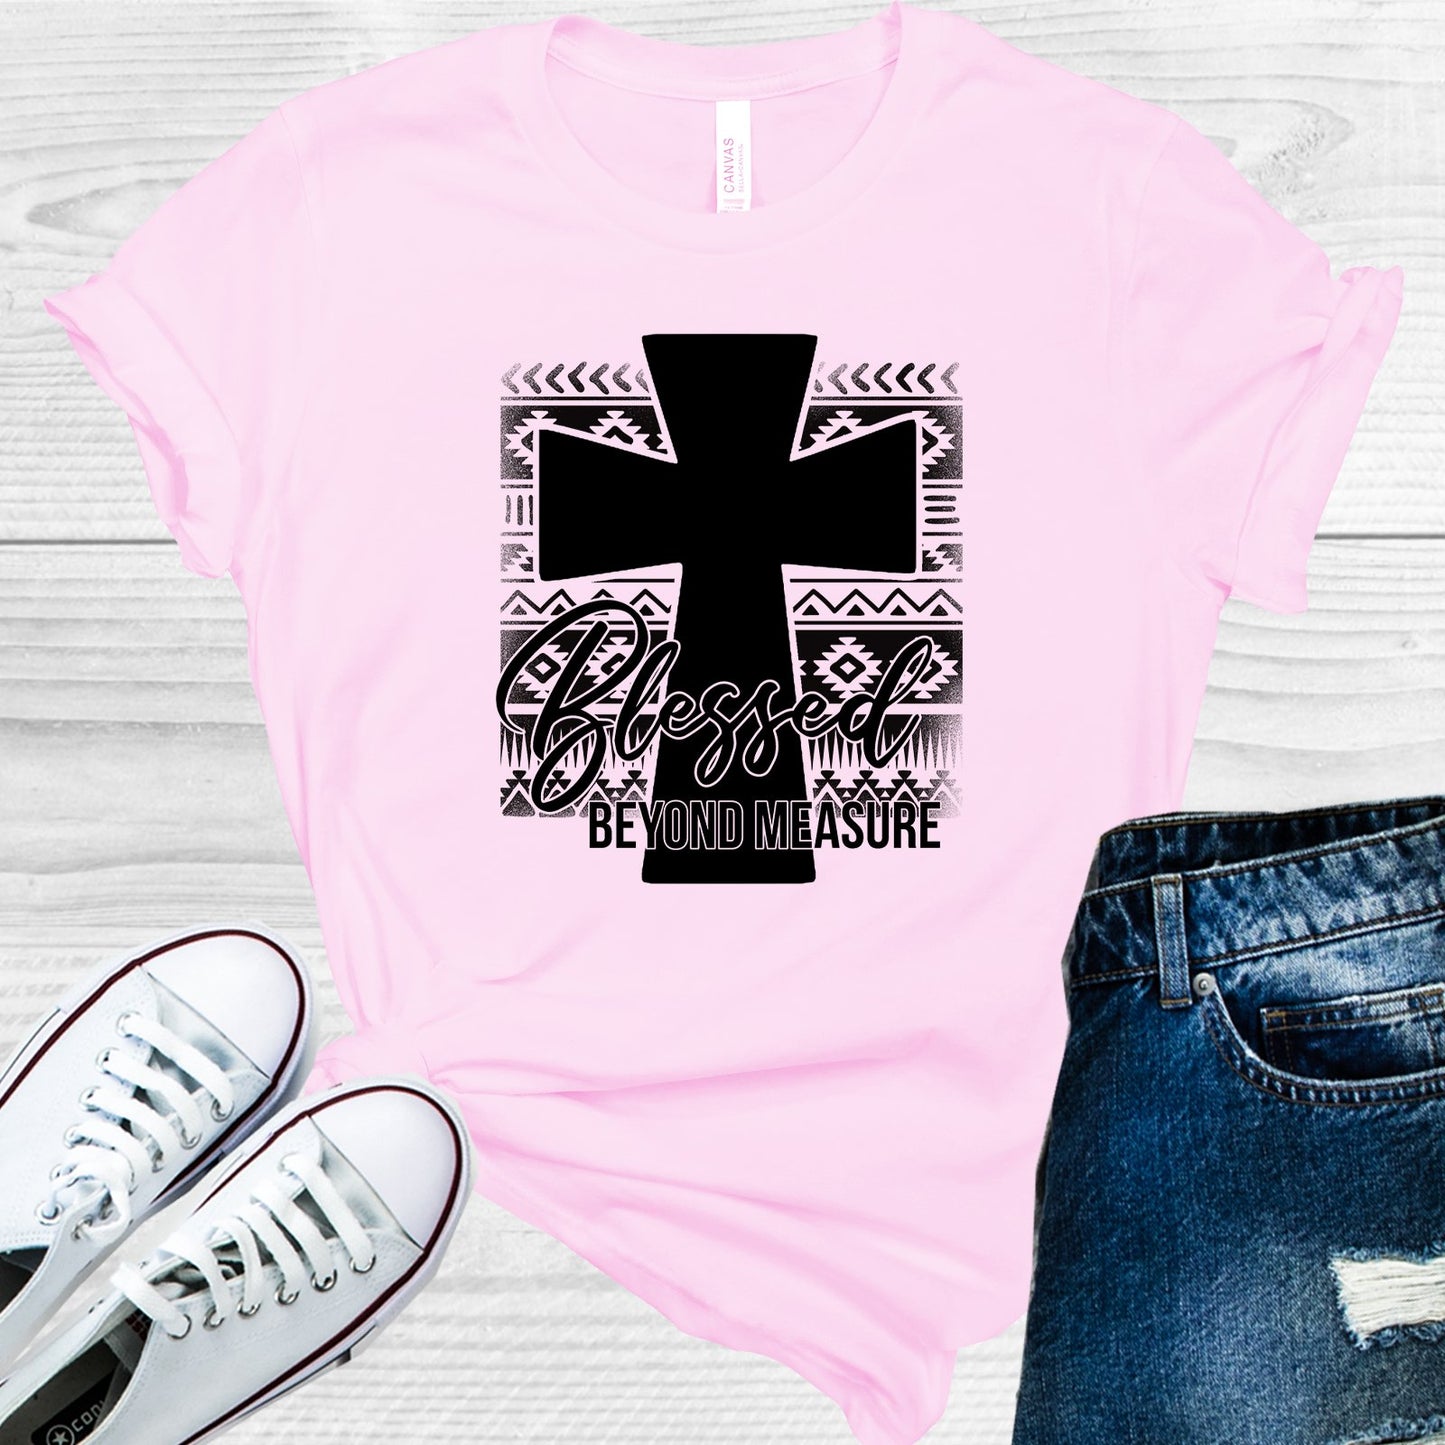 Blessed Beyond Measure Graphic Tee Graphic Tee